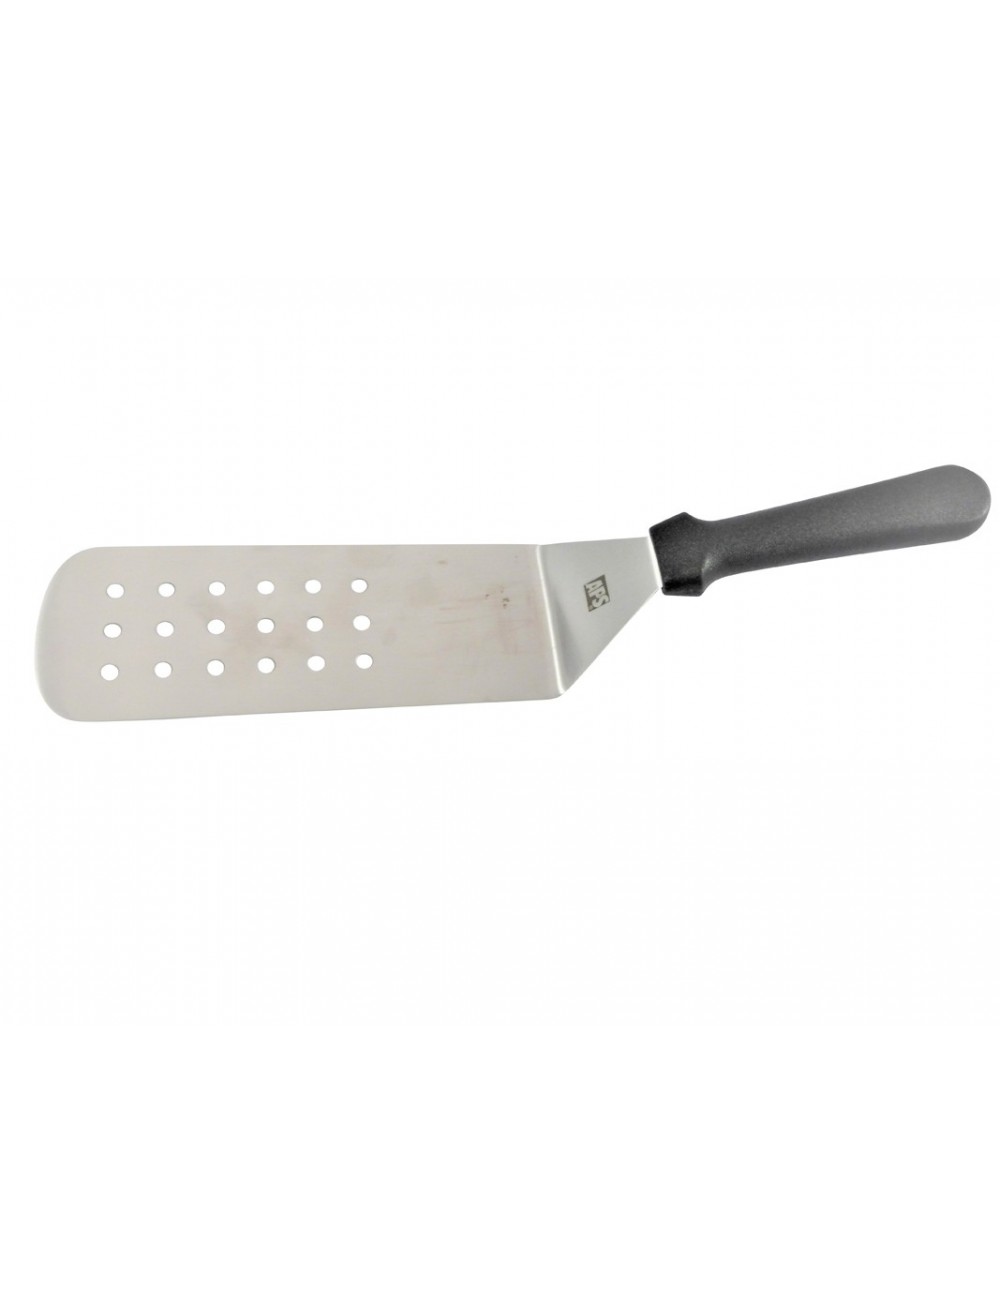 CURVED SLOTTED SPATULA - POLYPROPYLENE HANDLE - PURCHASE OF KITCHEN UTENSILS